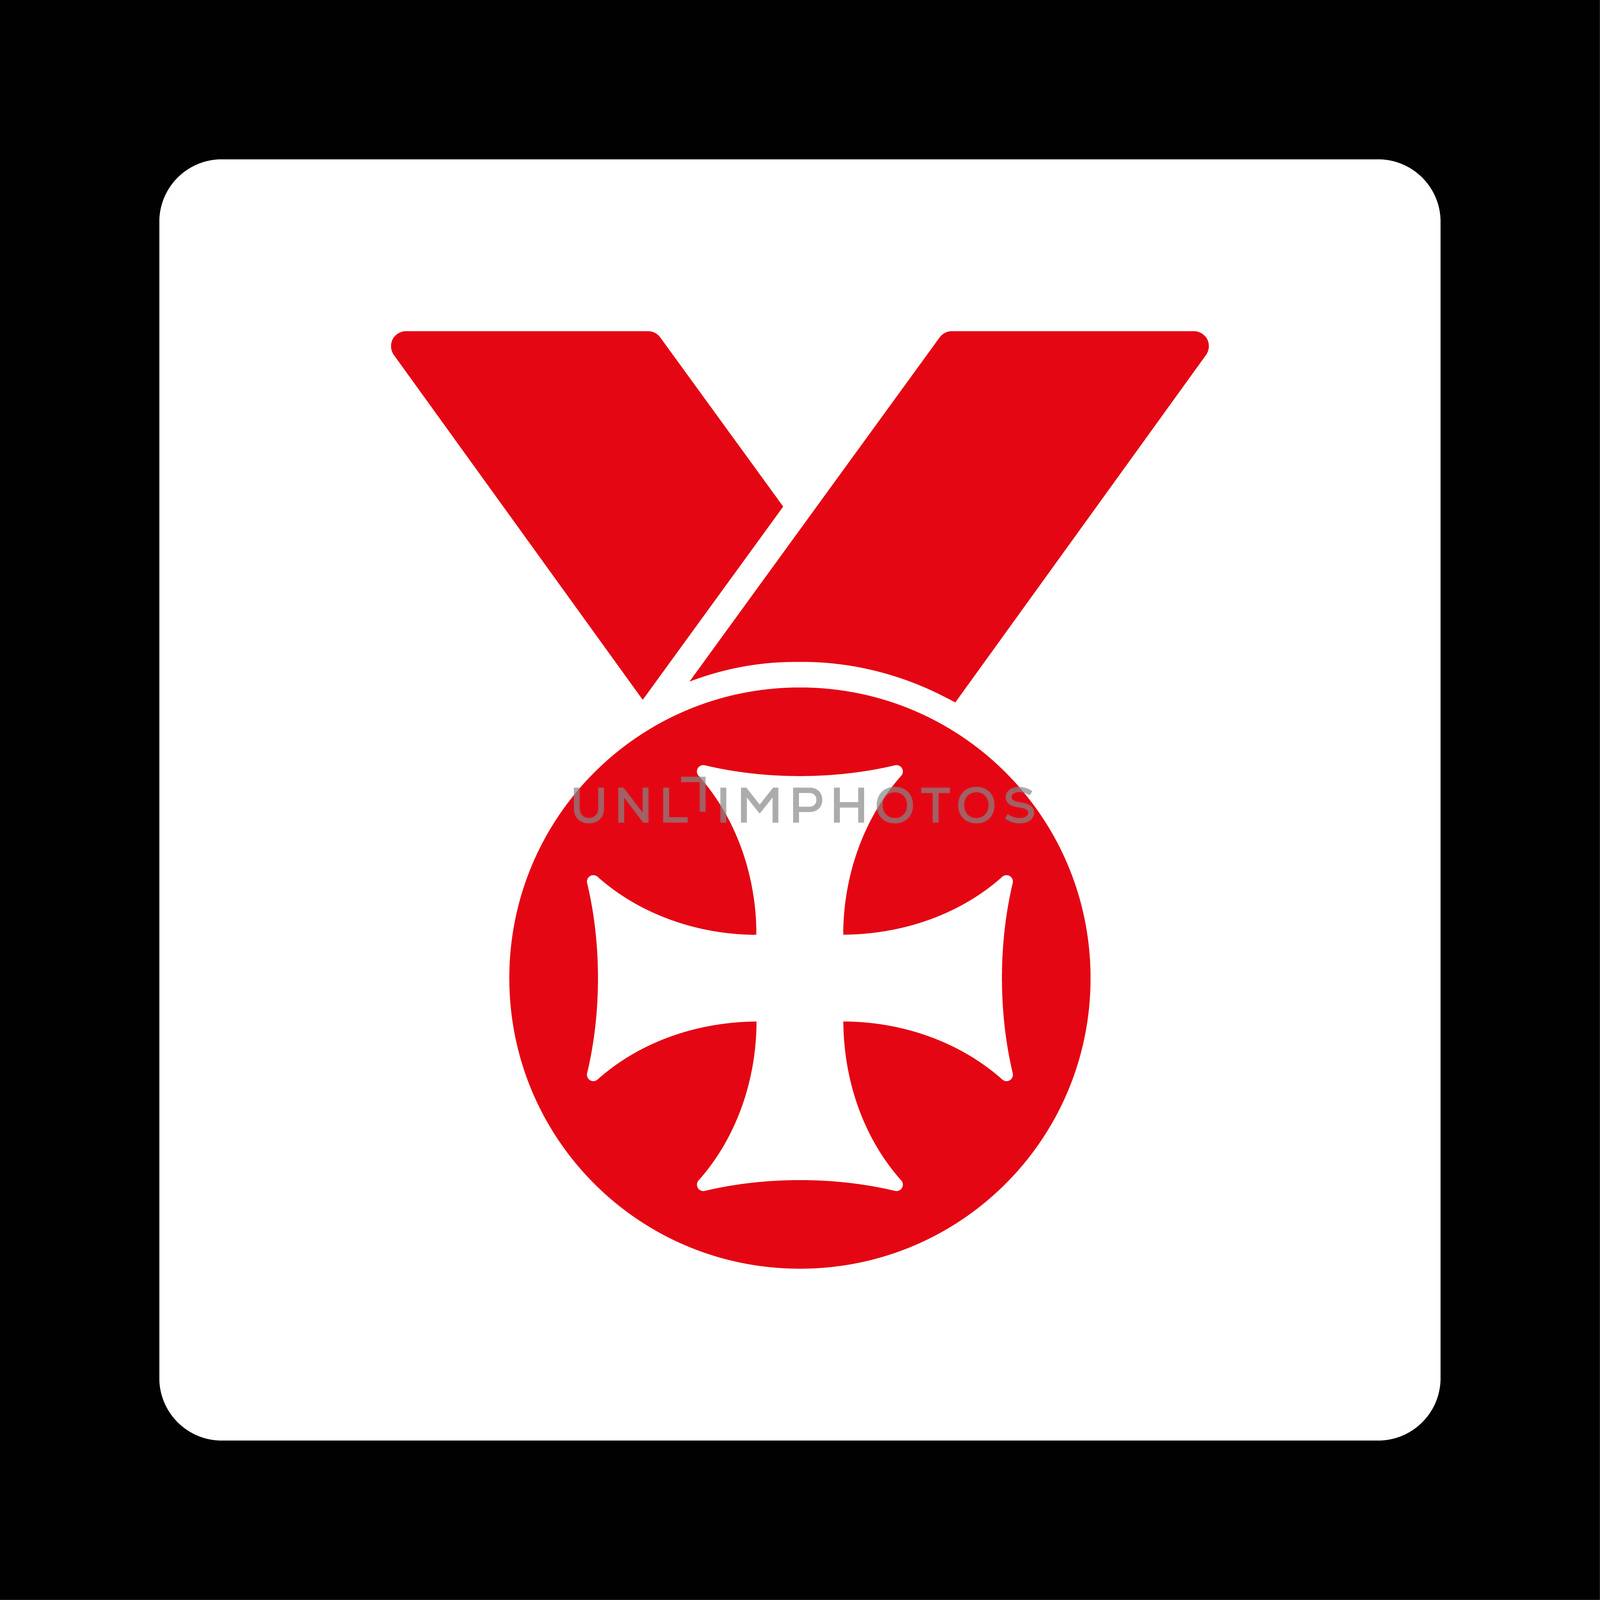 Maltese medal icon from Award Buttons OverColor Set. Icon style is red and white colors, flat rounded square button, black background.